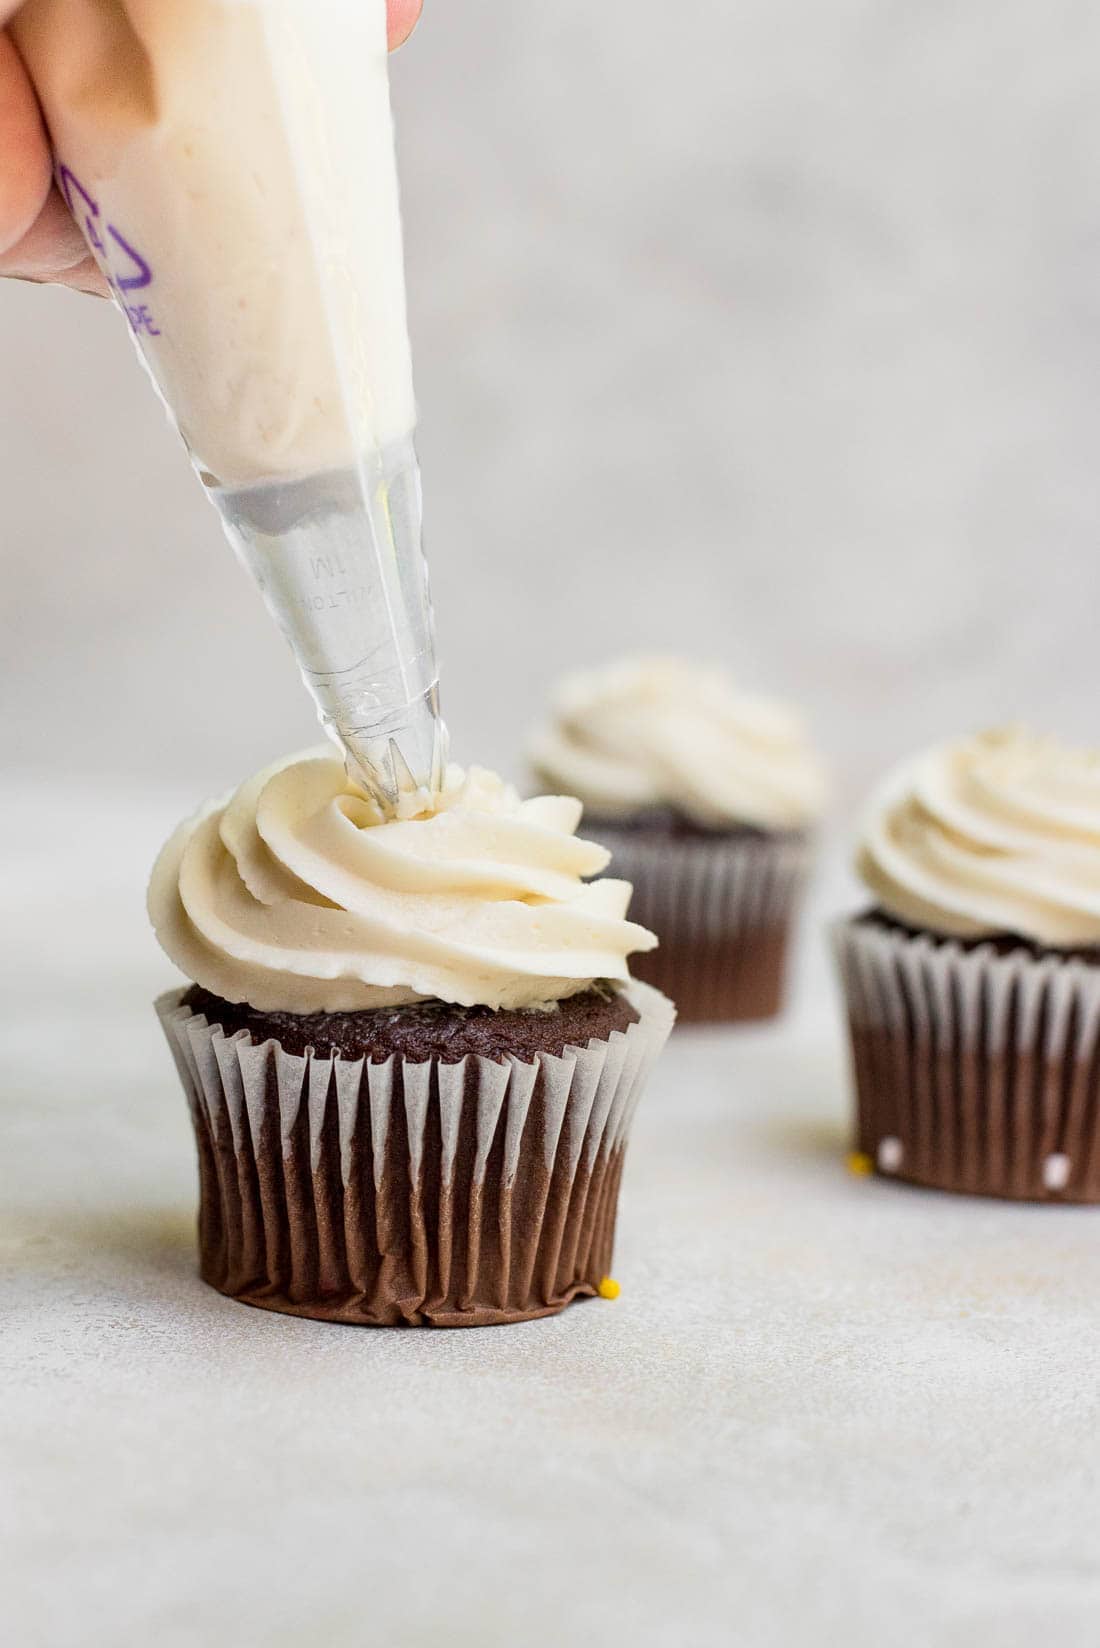 frosting being piped on cupcake